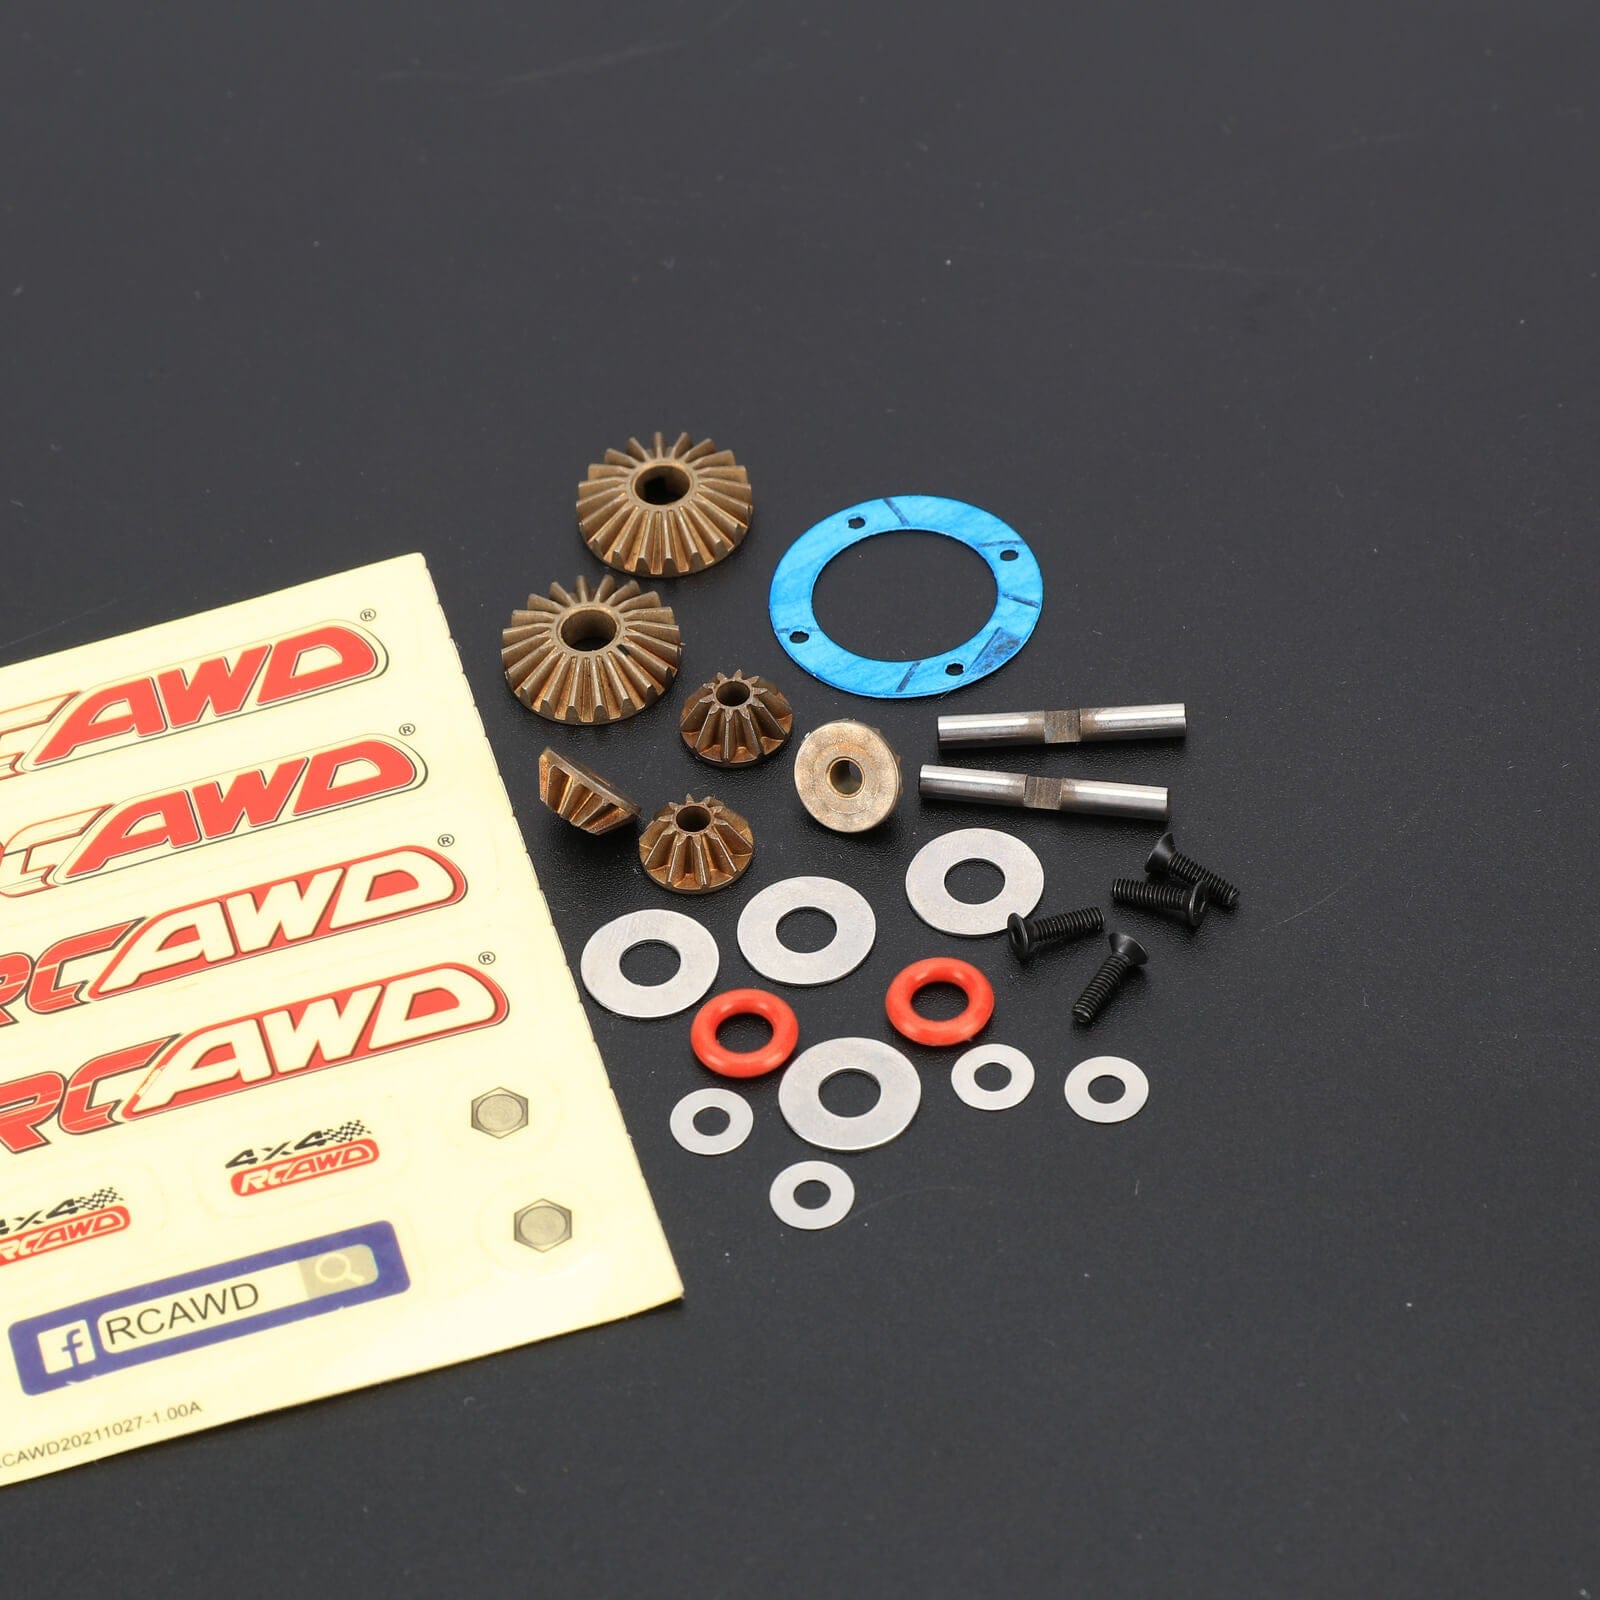 RCAWD LOSI Baja Rey 4WD Front RCAWD Losi Baja Rey 4WD Upgrades F/R Center Open Rear Differential Gear Set